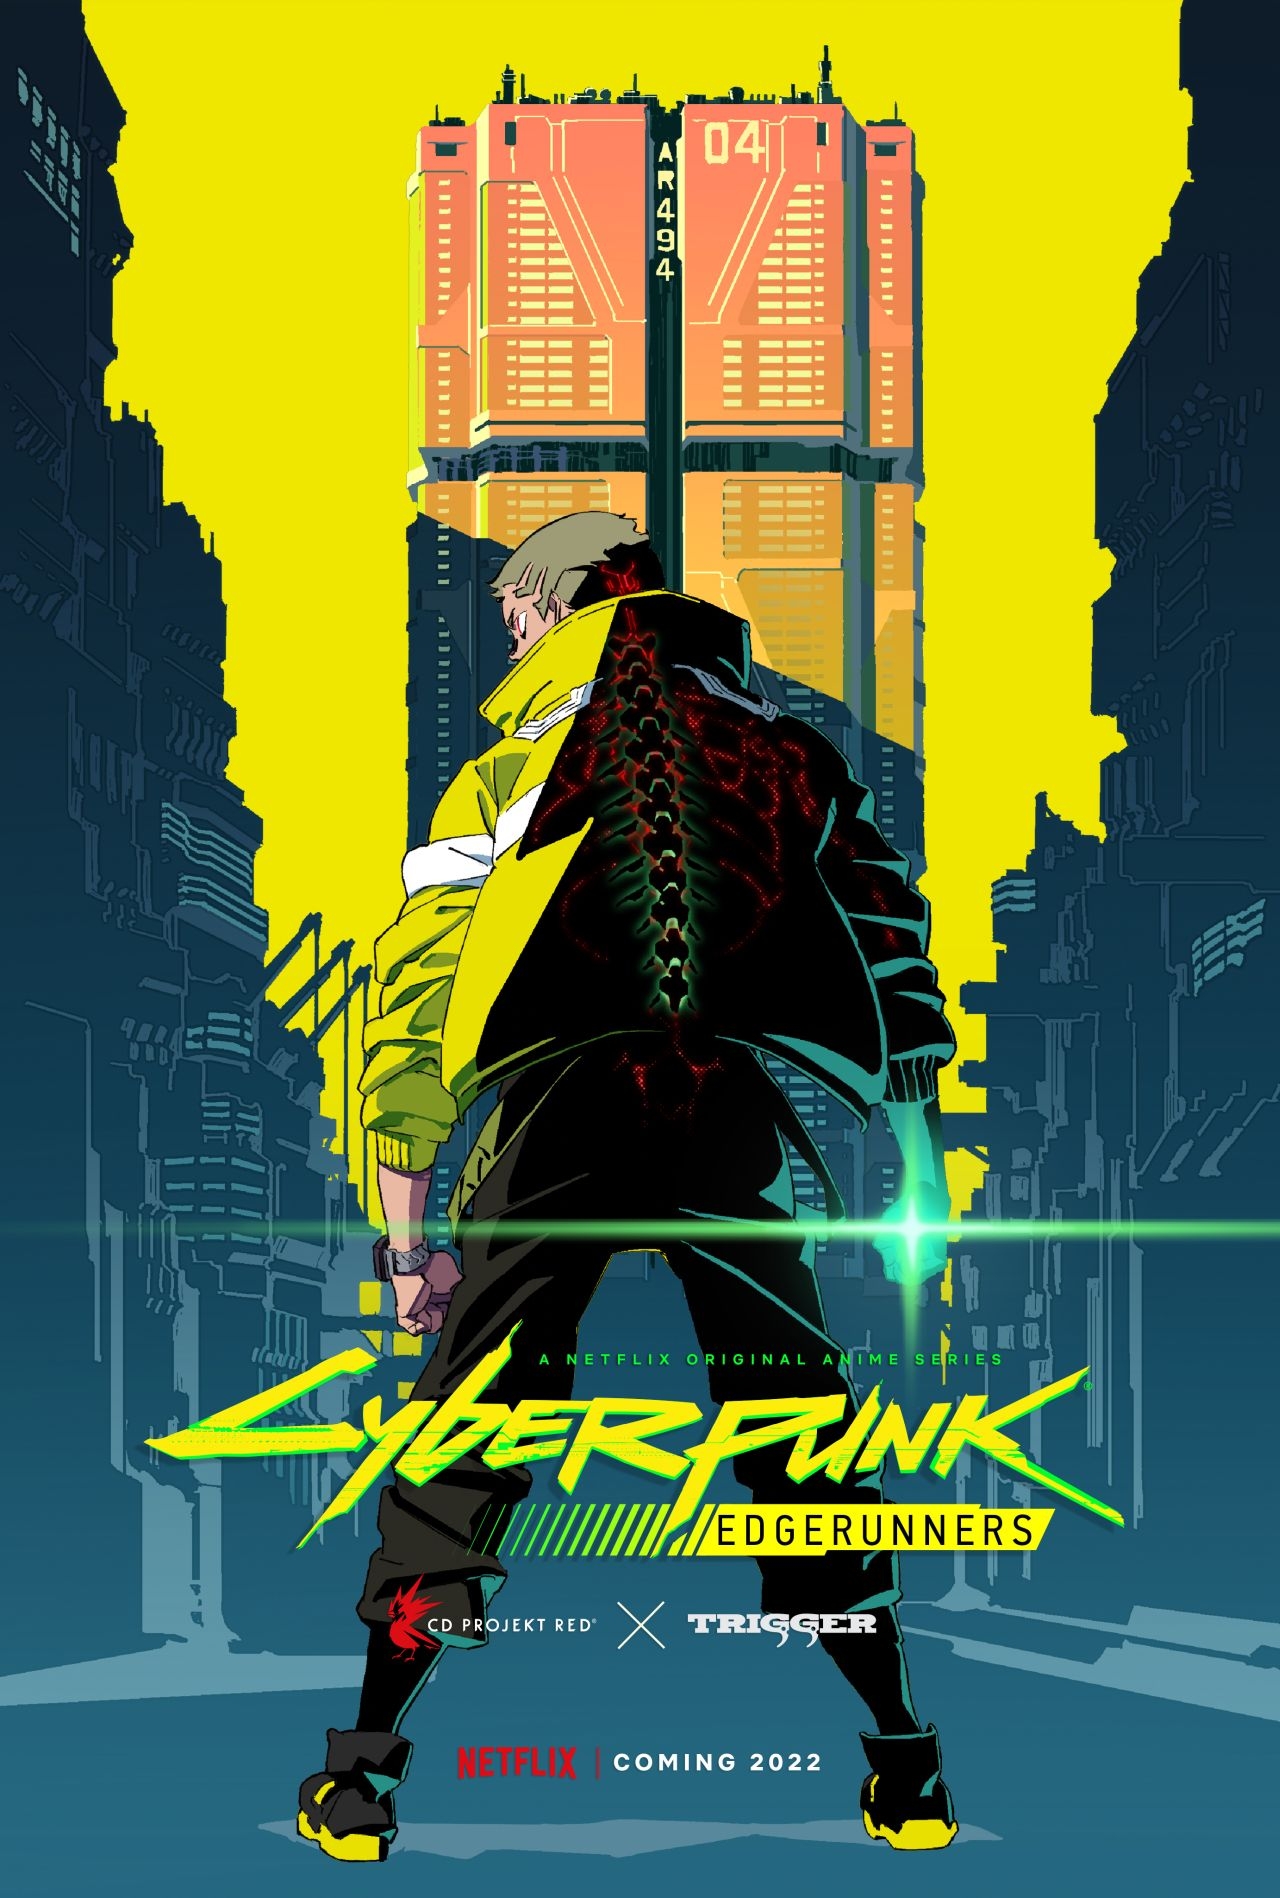 Cyberpunk 2077: Edgerunners shows you how a great anime tie-in